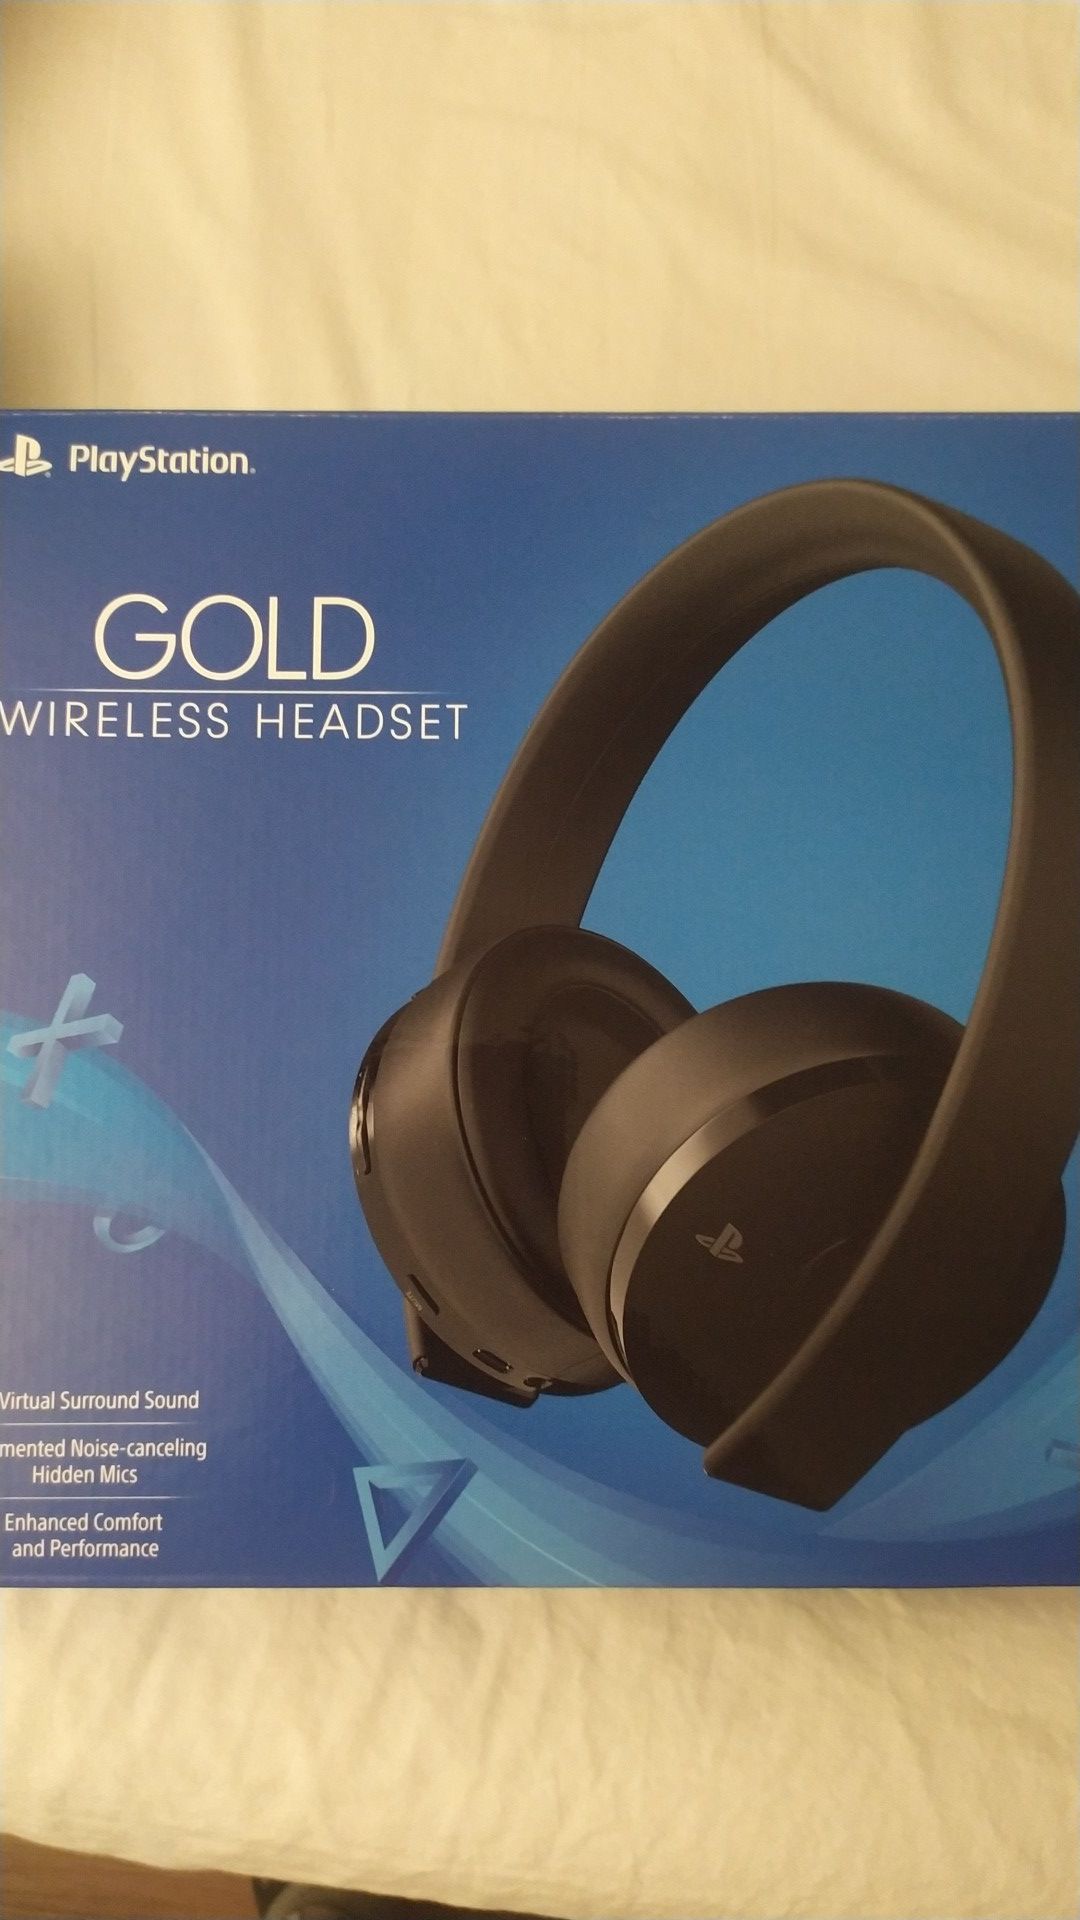 PlayStation Headset, wireless and wired